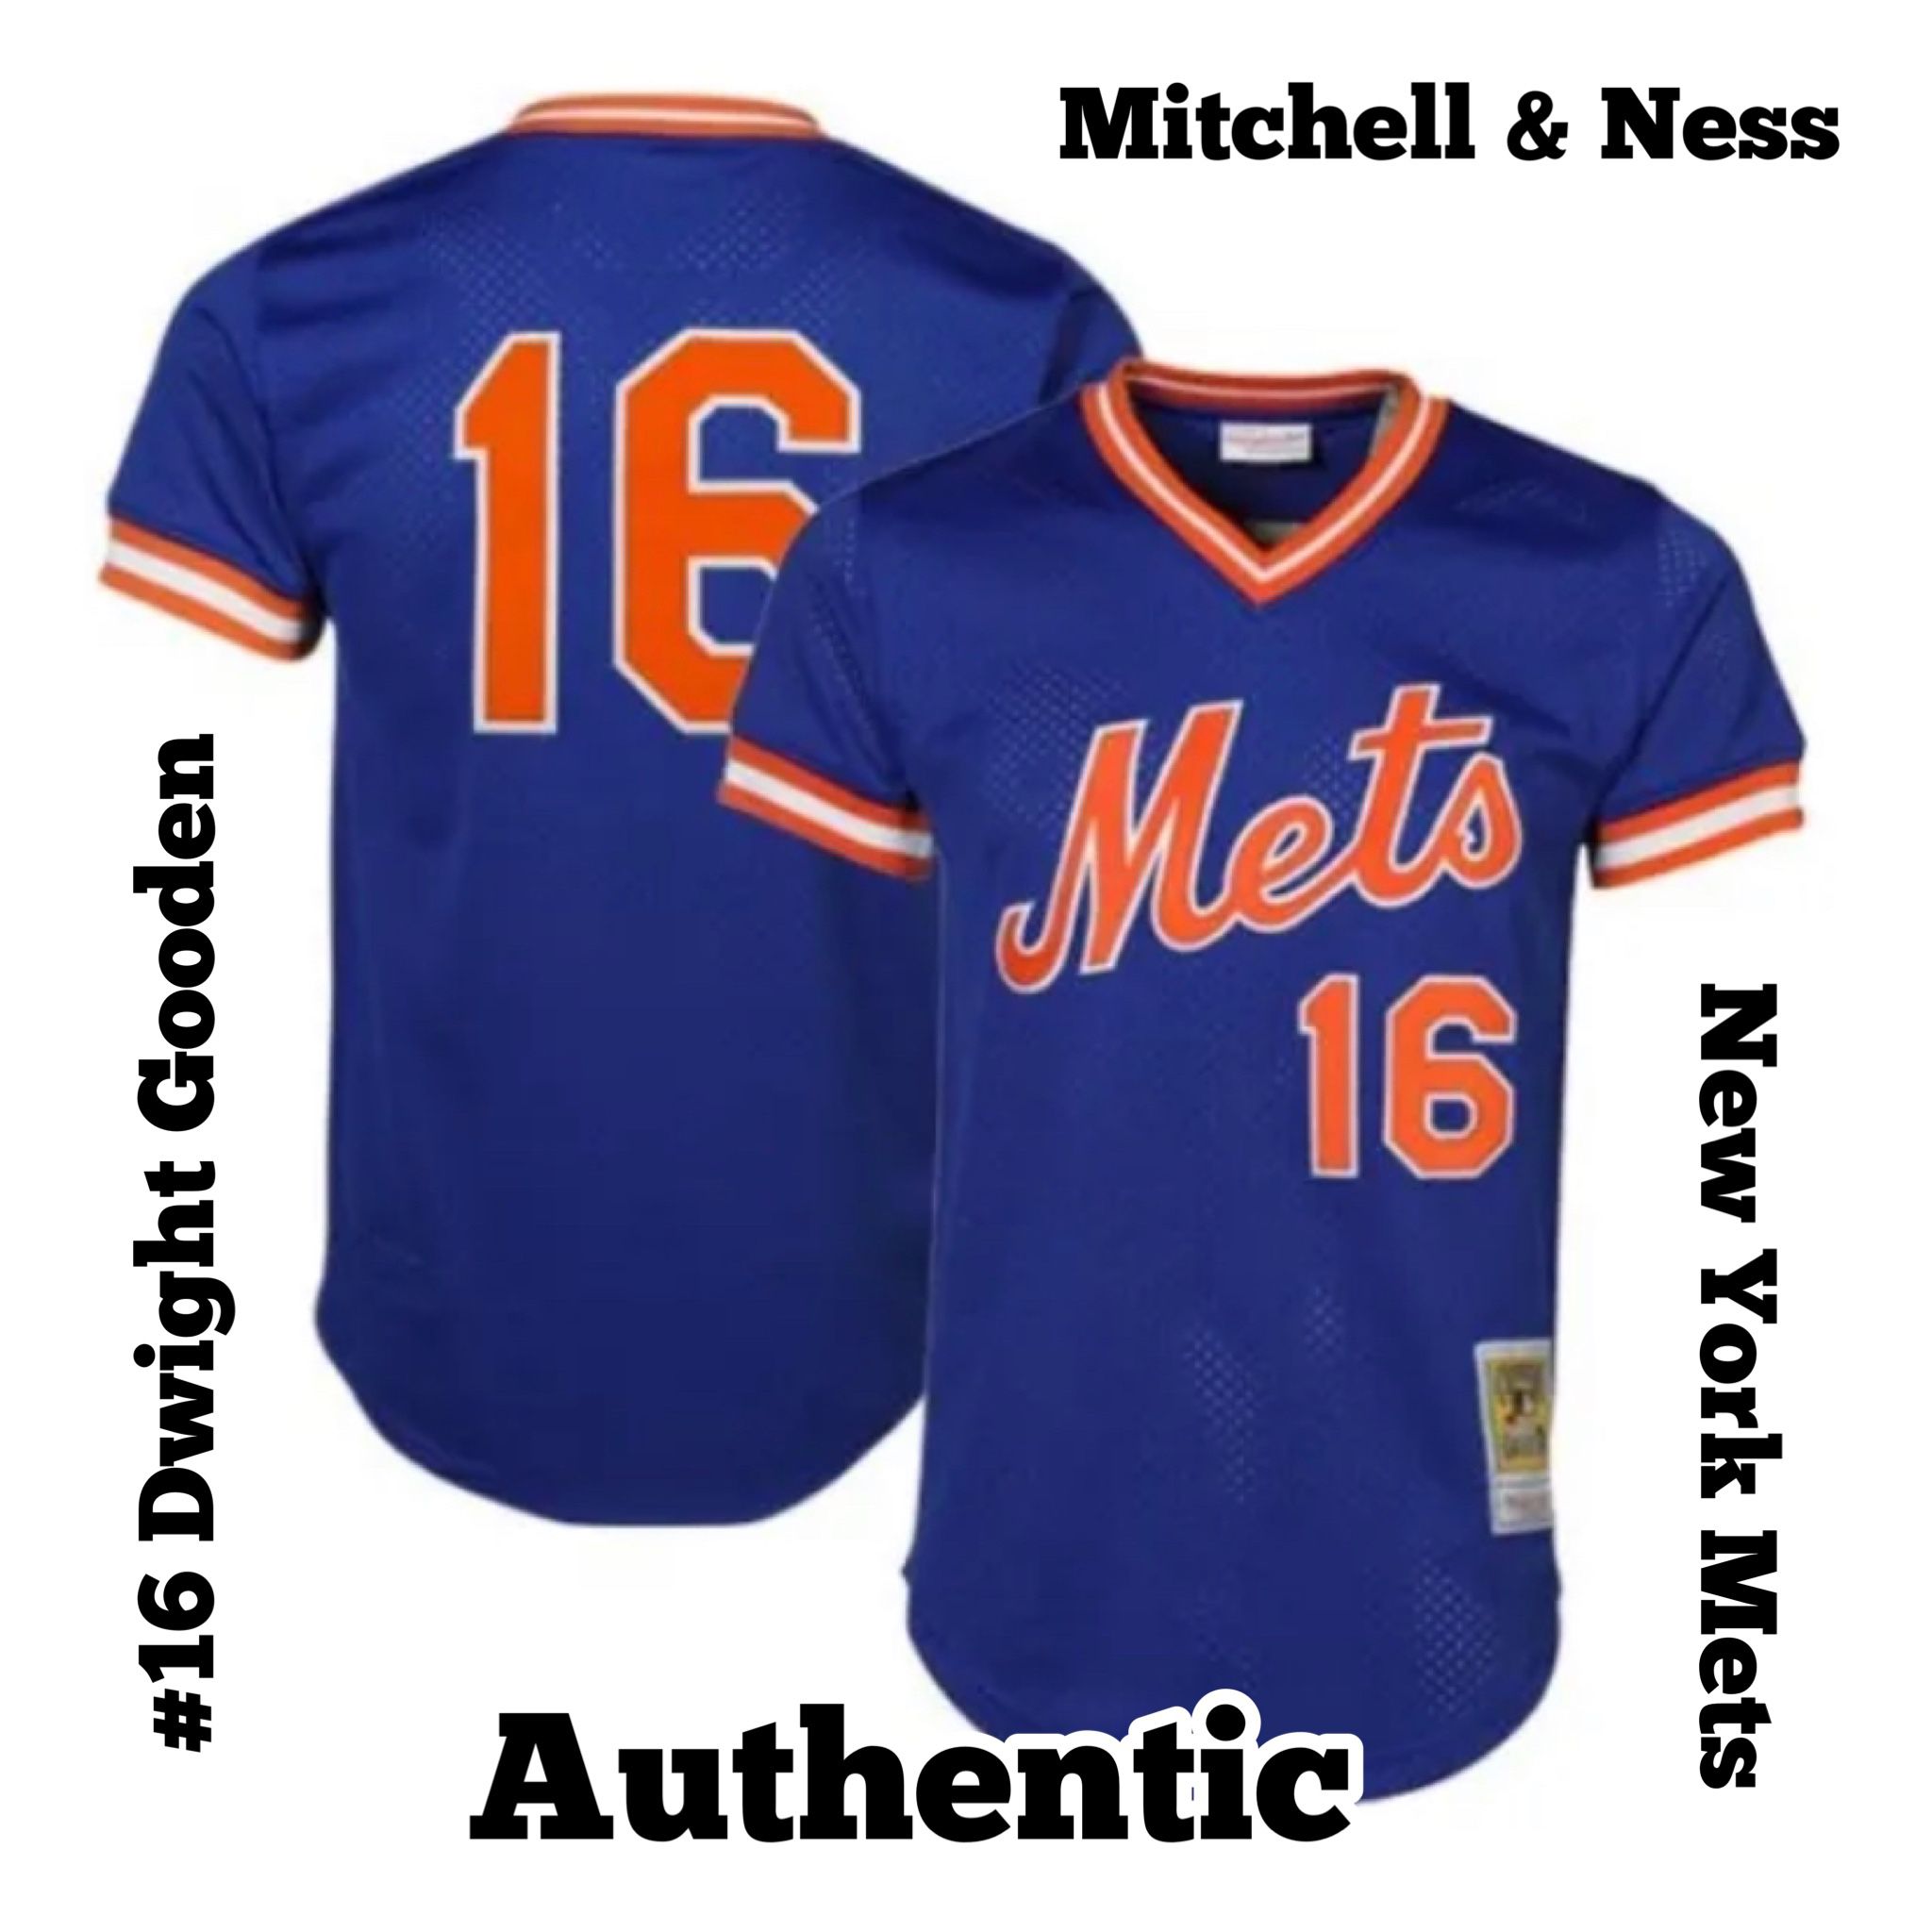 NY Mets Dwight Gooden Jersey for Sale in Staten Island, NY - OfferUp